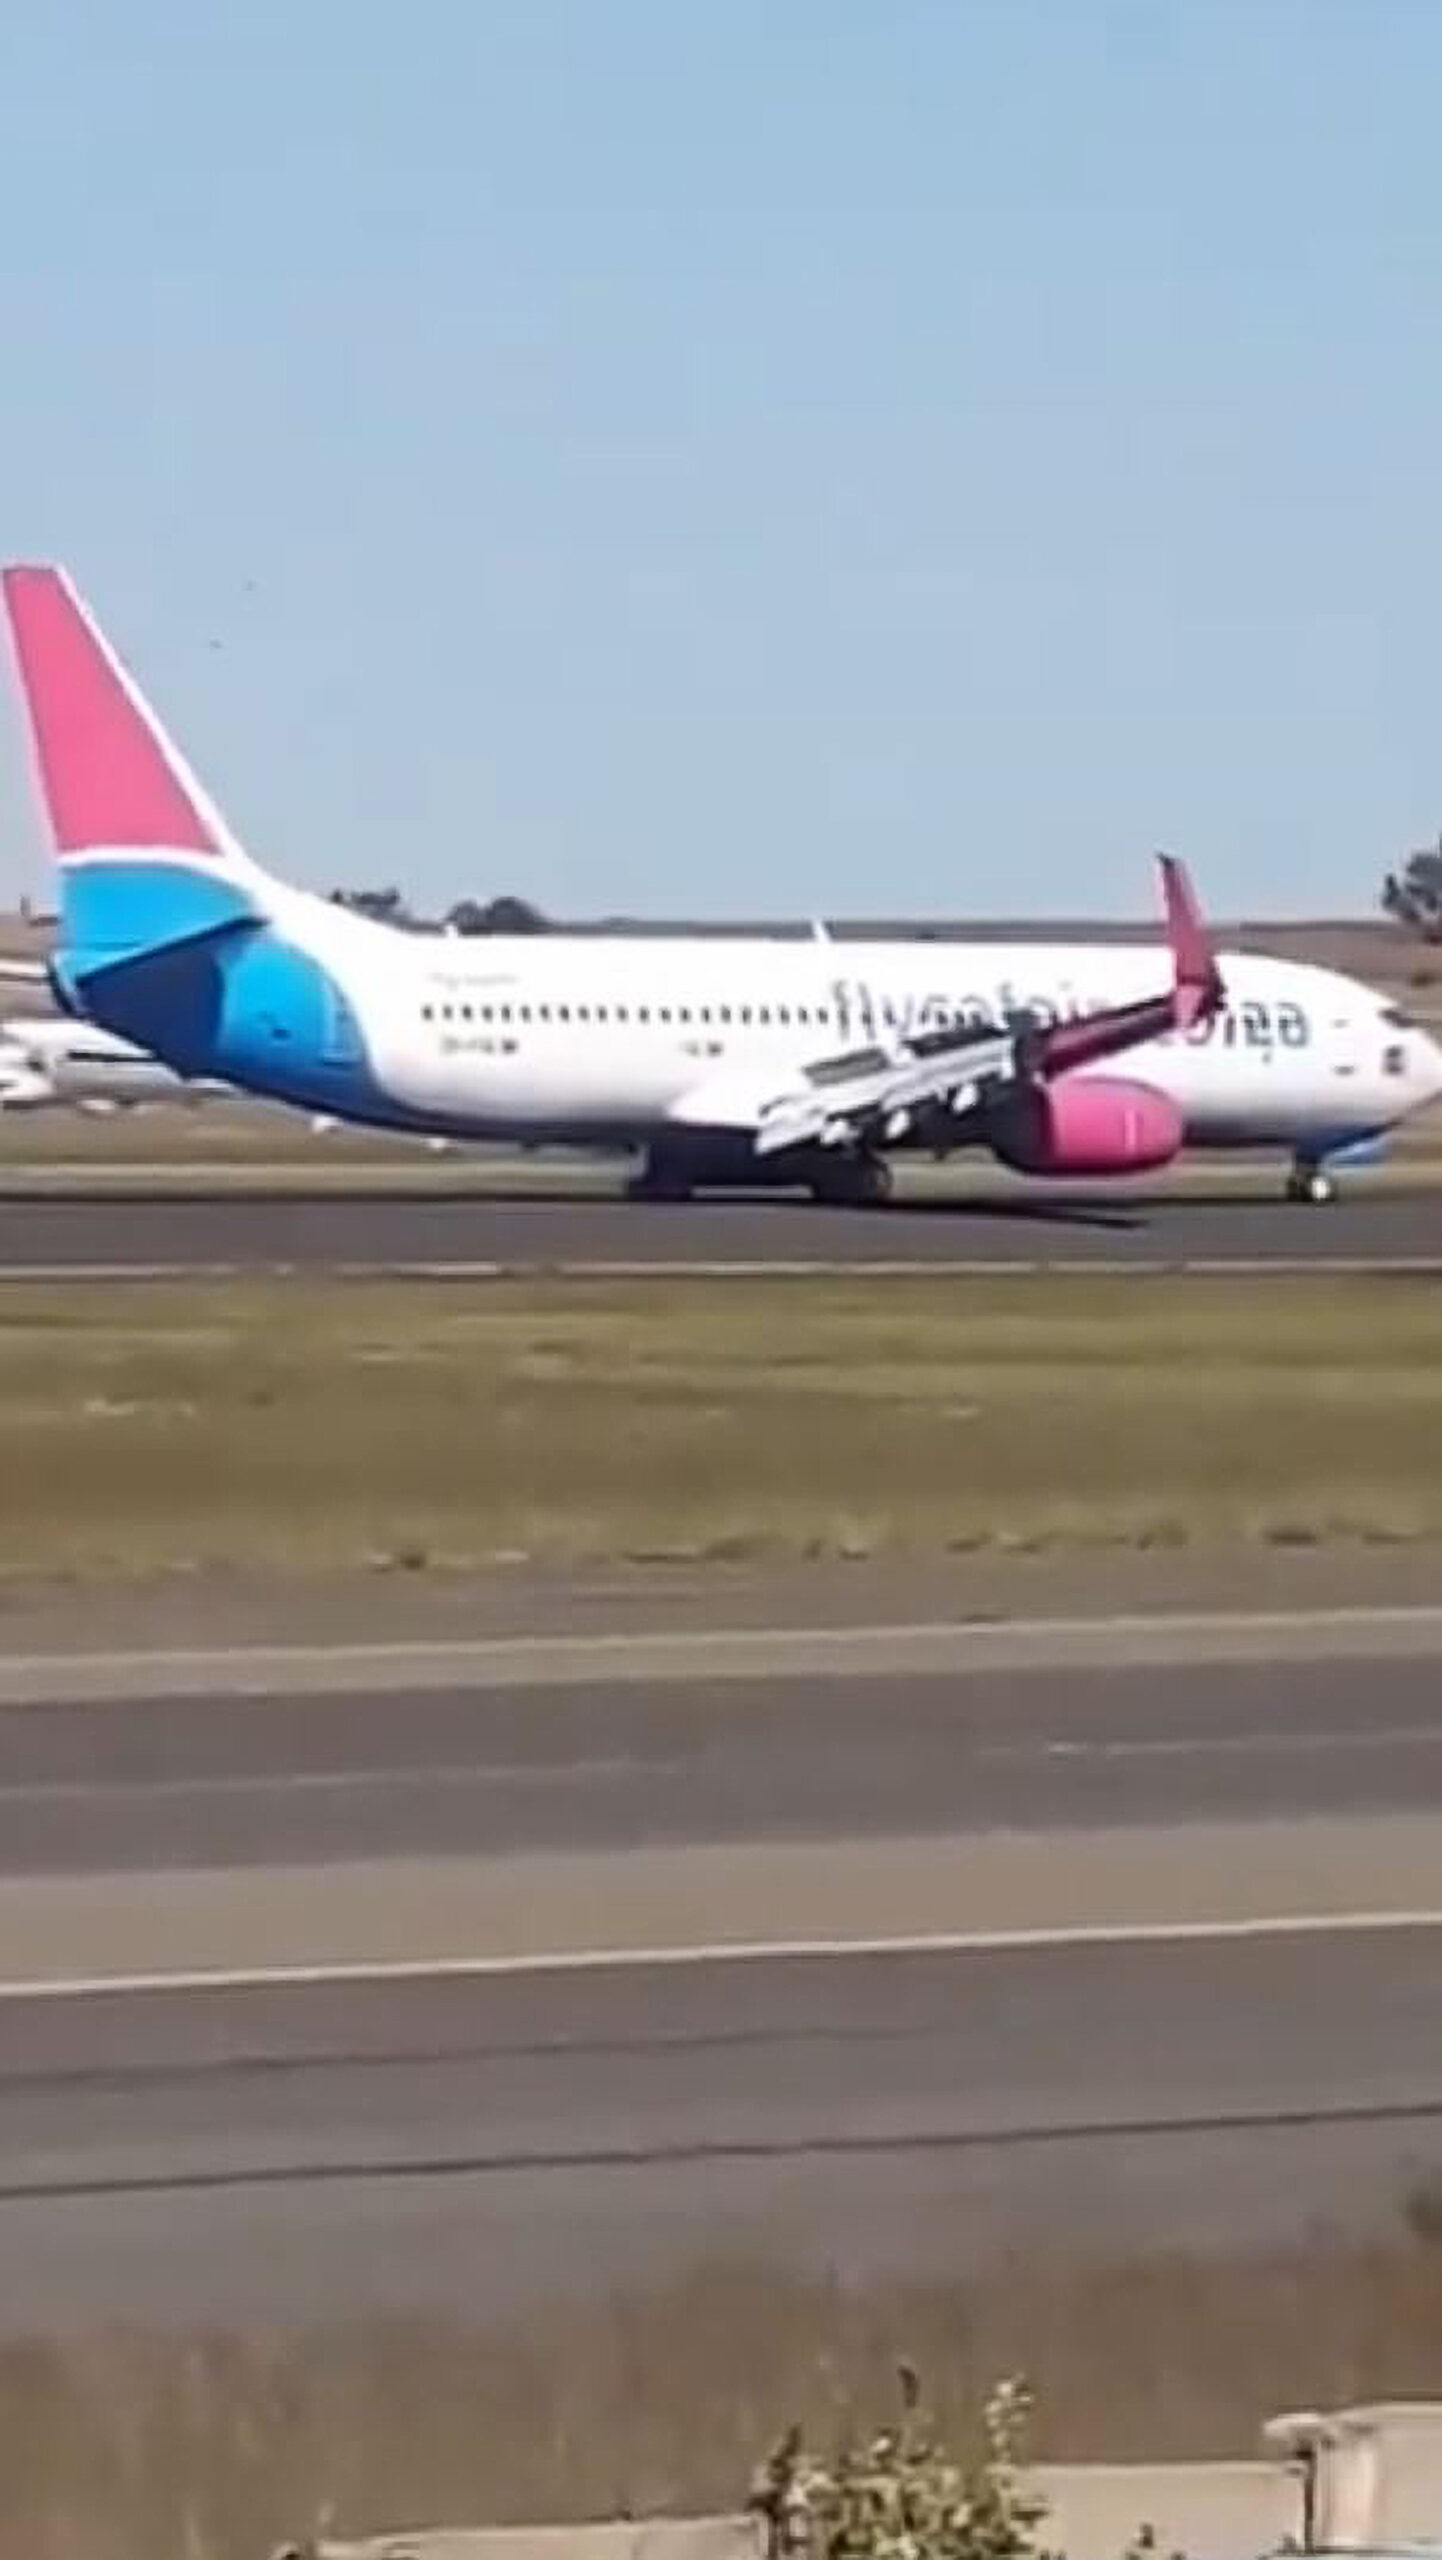 Read more about the article  Wheel Falls Off Troubled 737 Passenger Jet